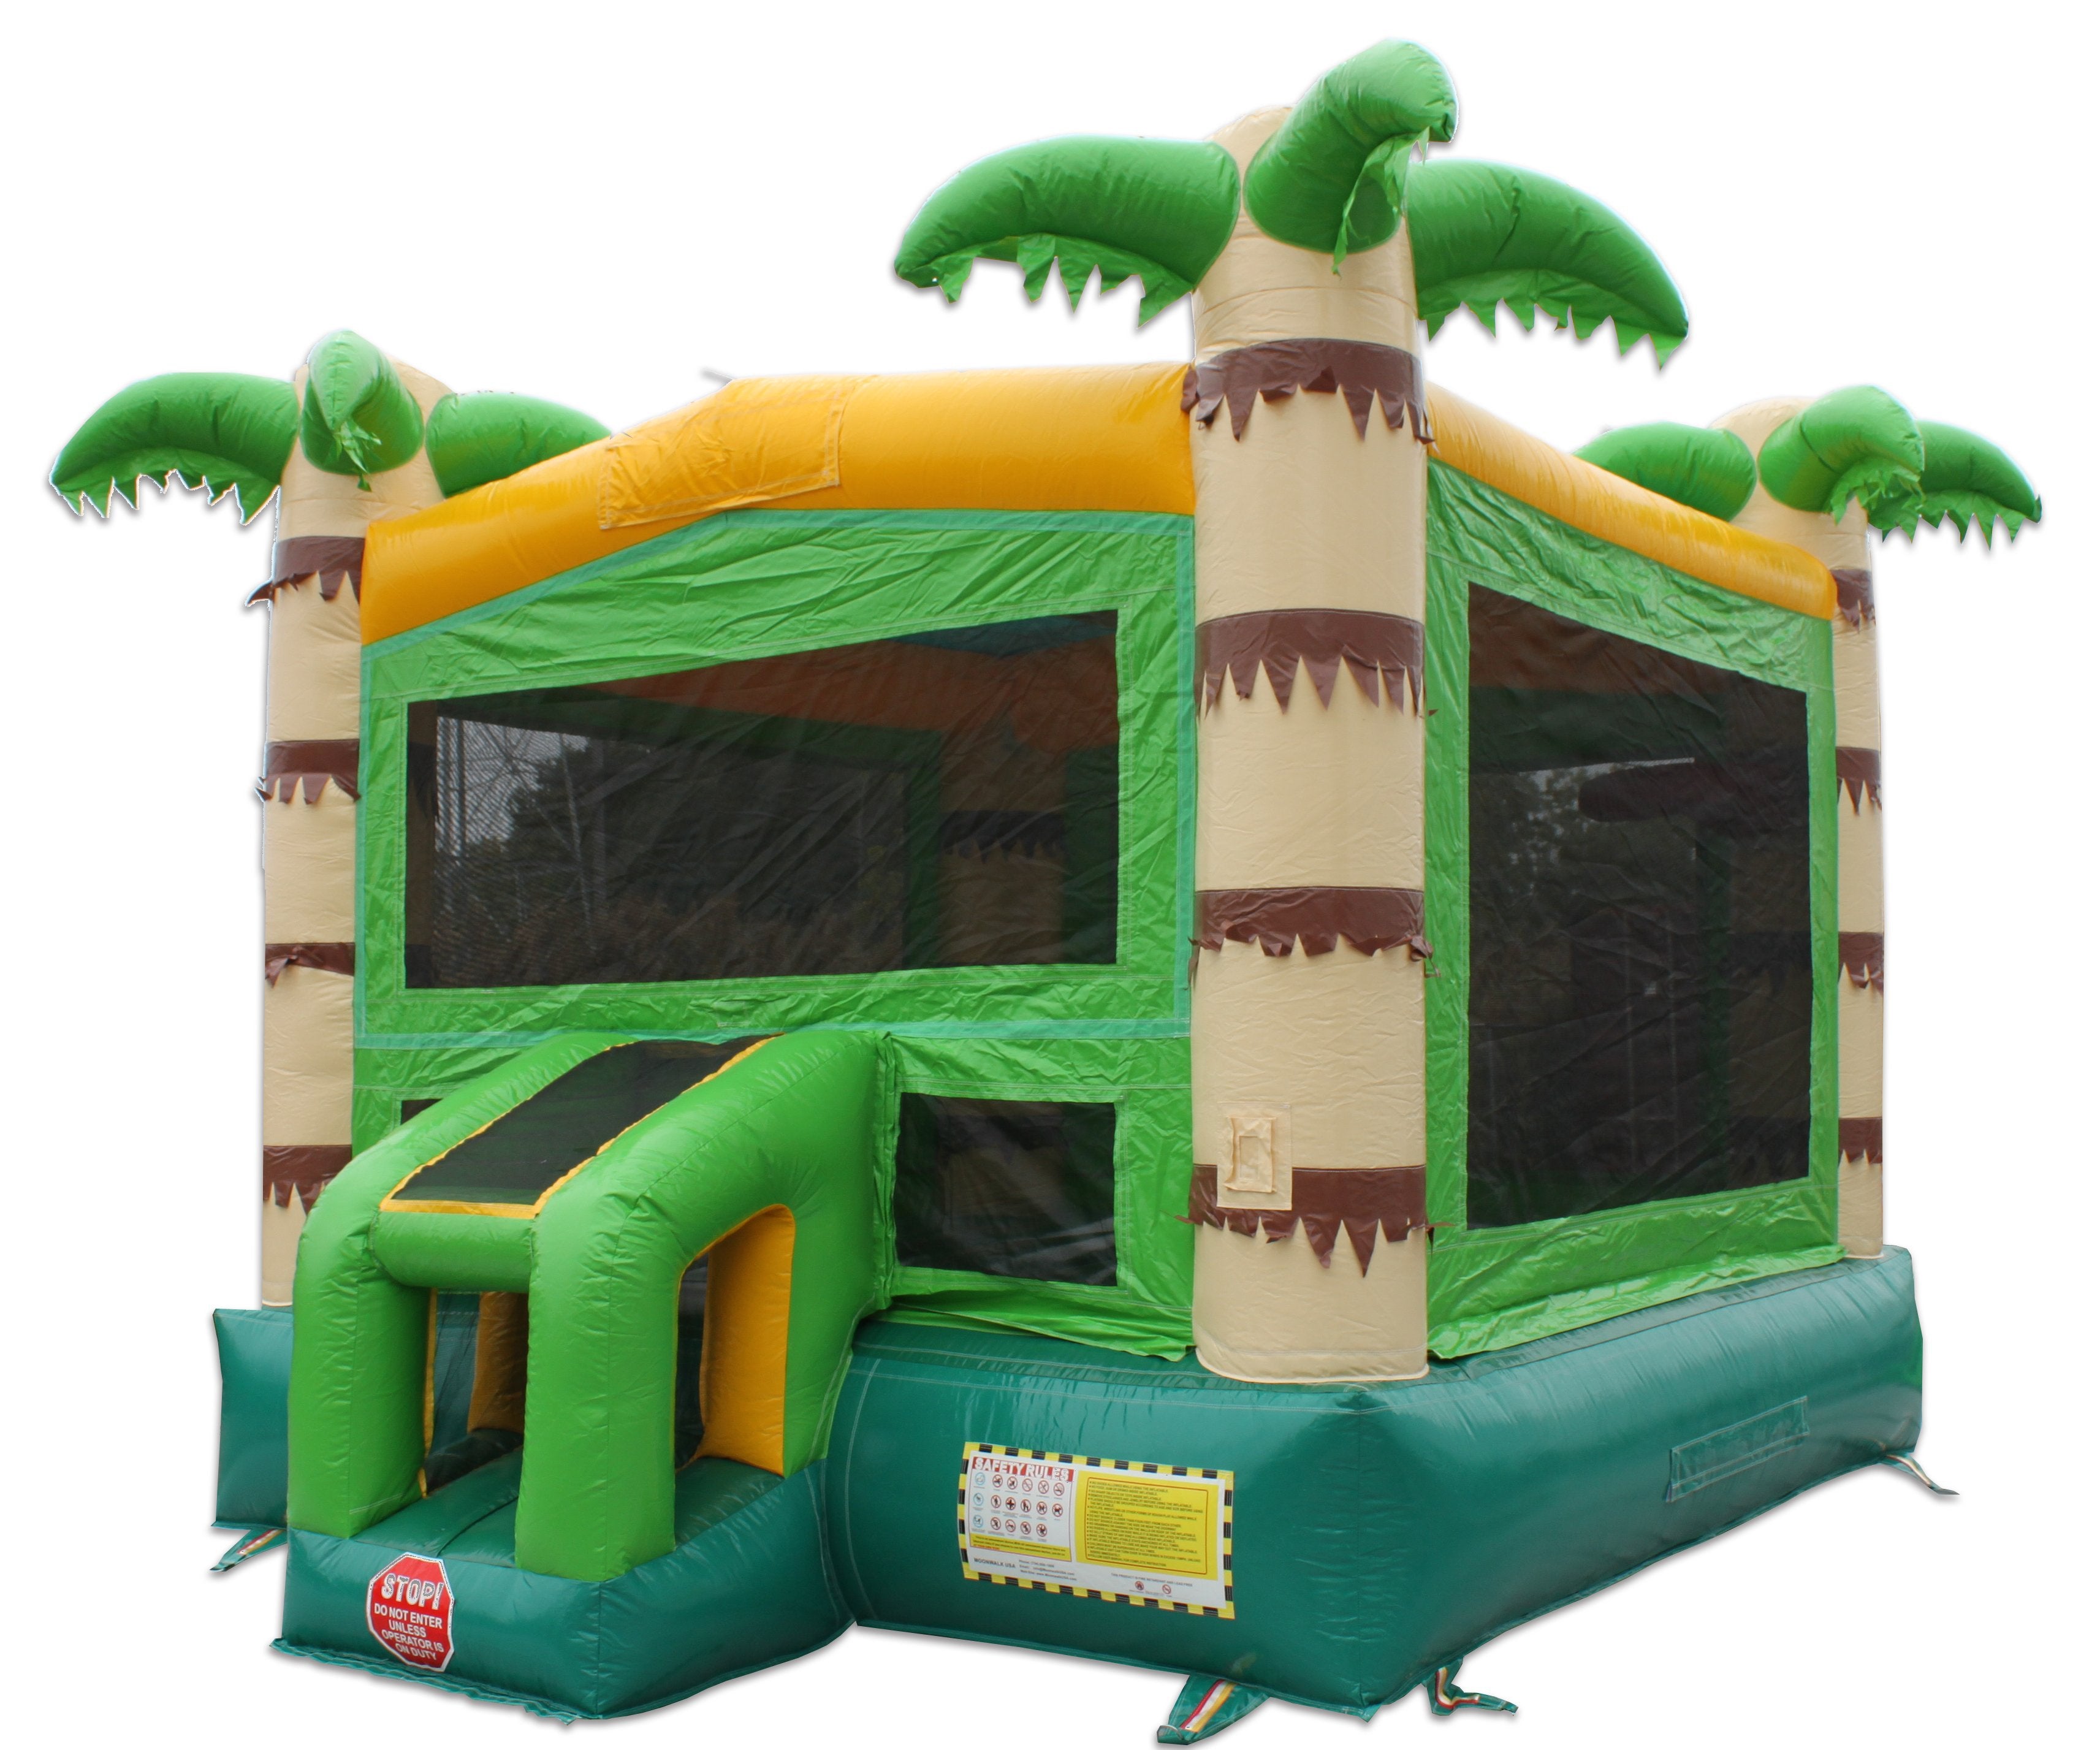 Moonwalk USA Commercial Bounce House 14' Palm Tree Commercial Bounce House B-314